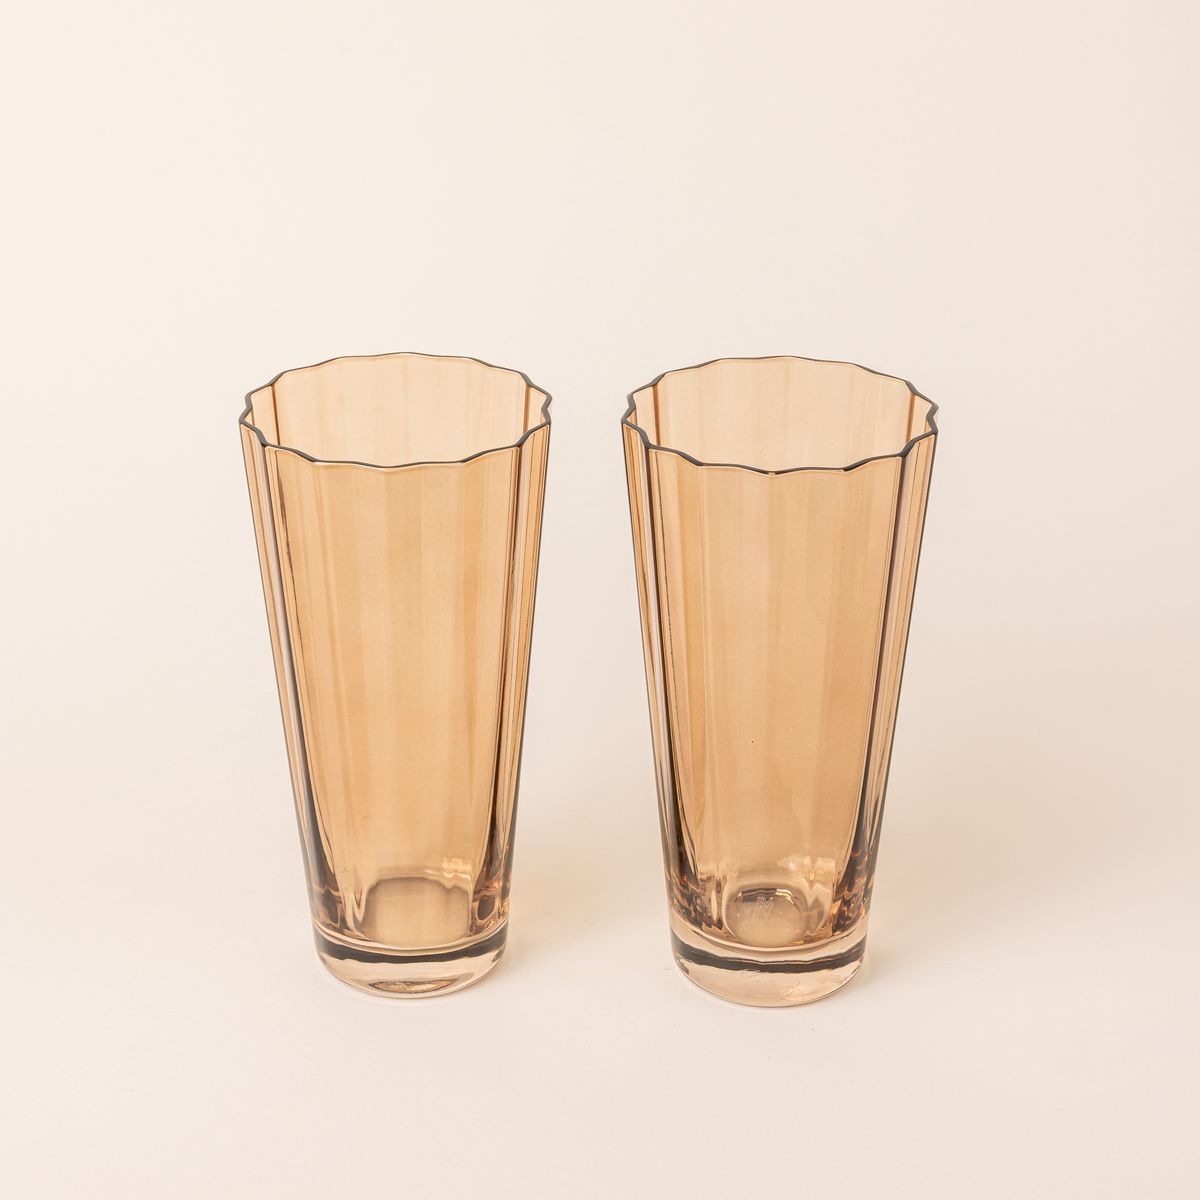 Two tall transparent light amber glasses with wide grooves on the side